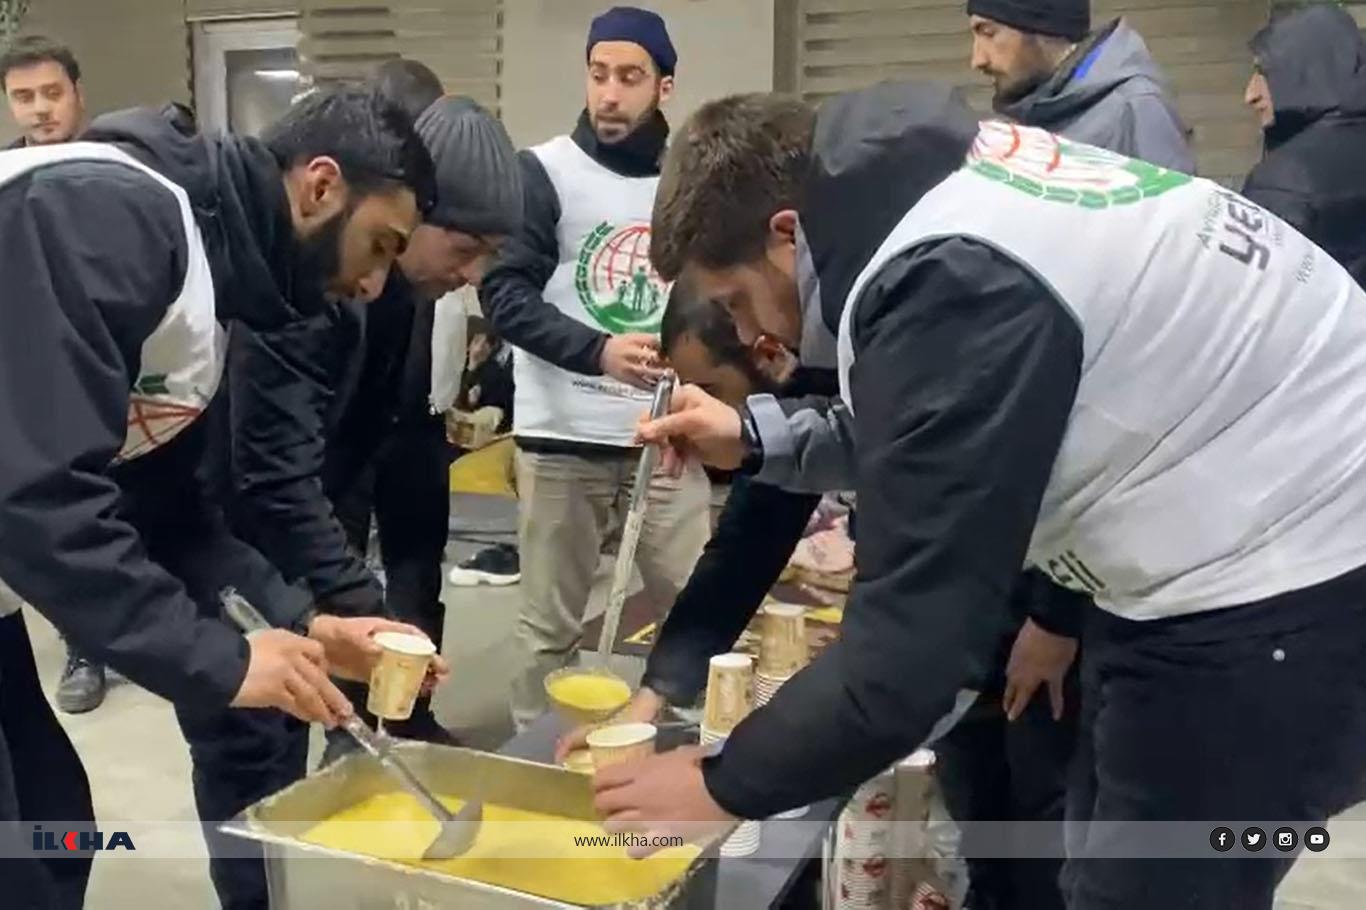 European Orphan Hand provides hot meals to earthquake-affected people in southeastern Türkiye